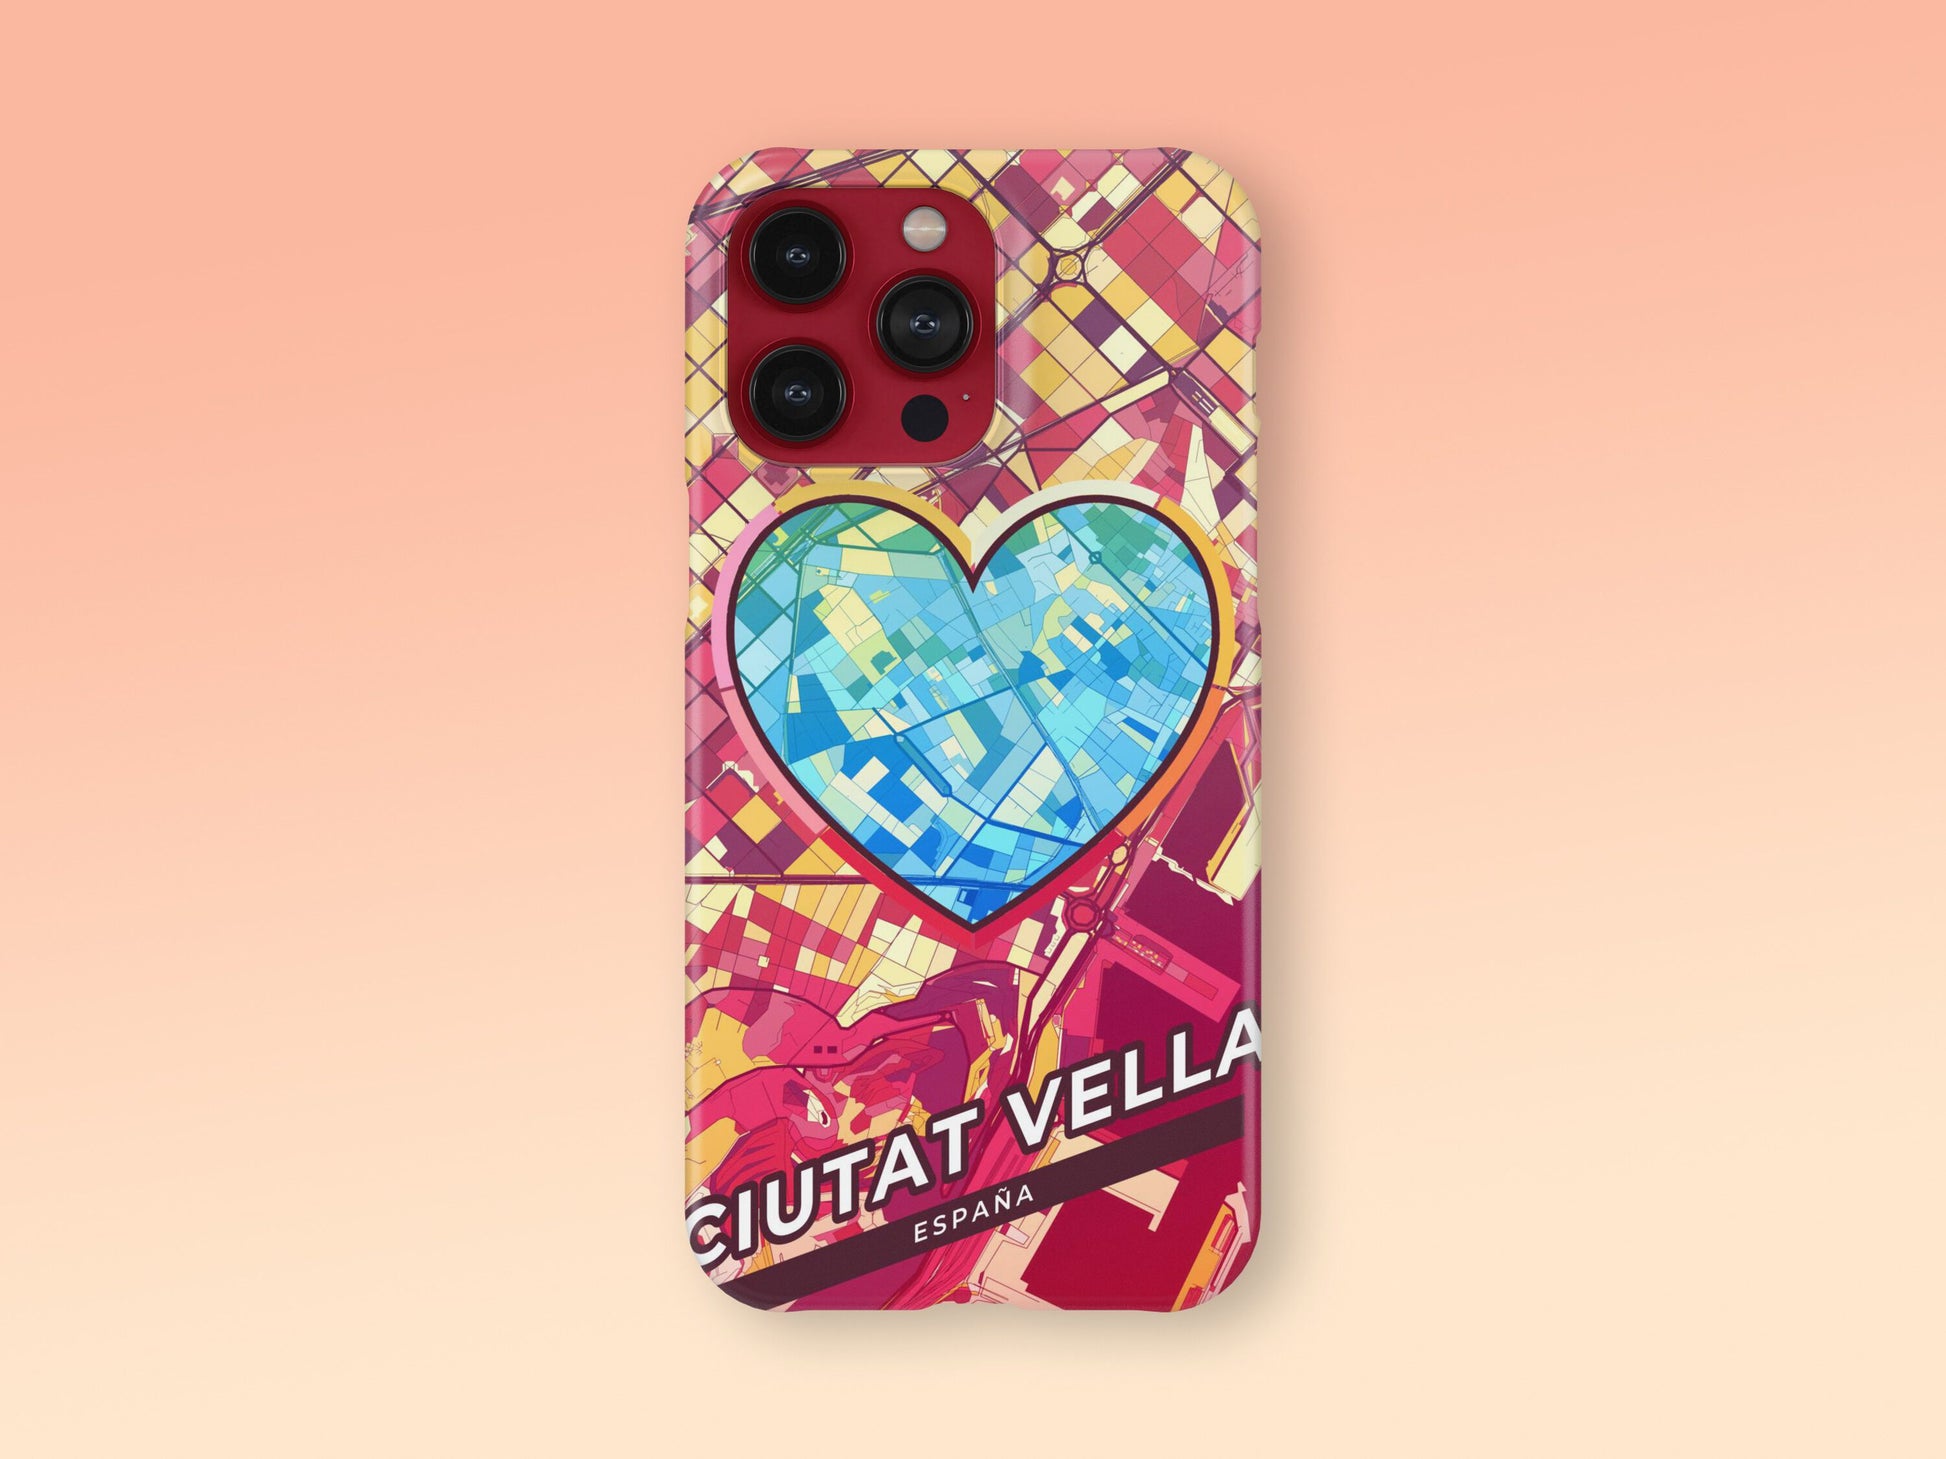 Ciutat Vella Spain slim phone case with colorful icon. Birthday, wedding or housewarming gift. Couple match cases. 2